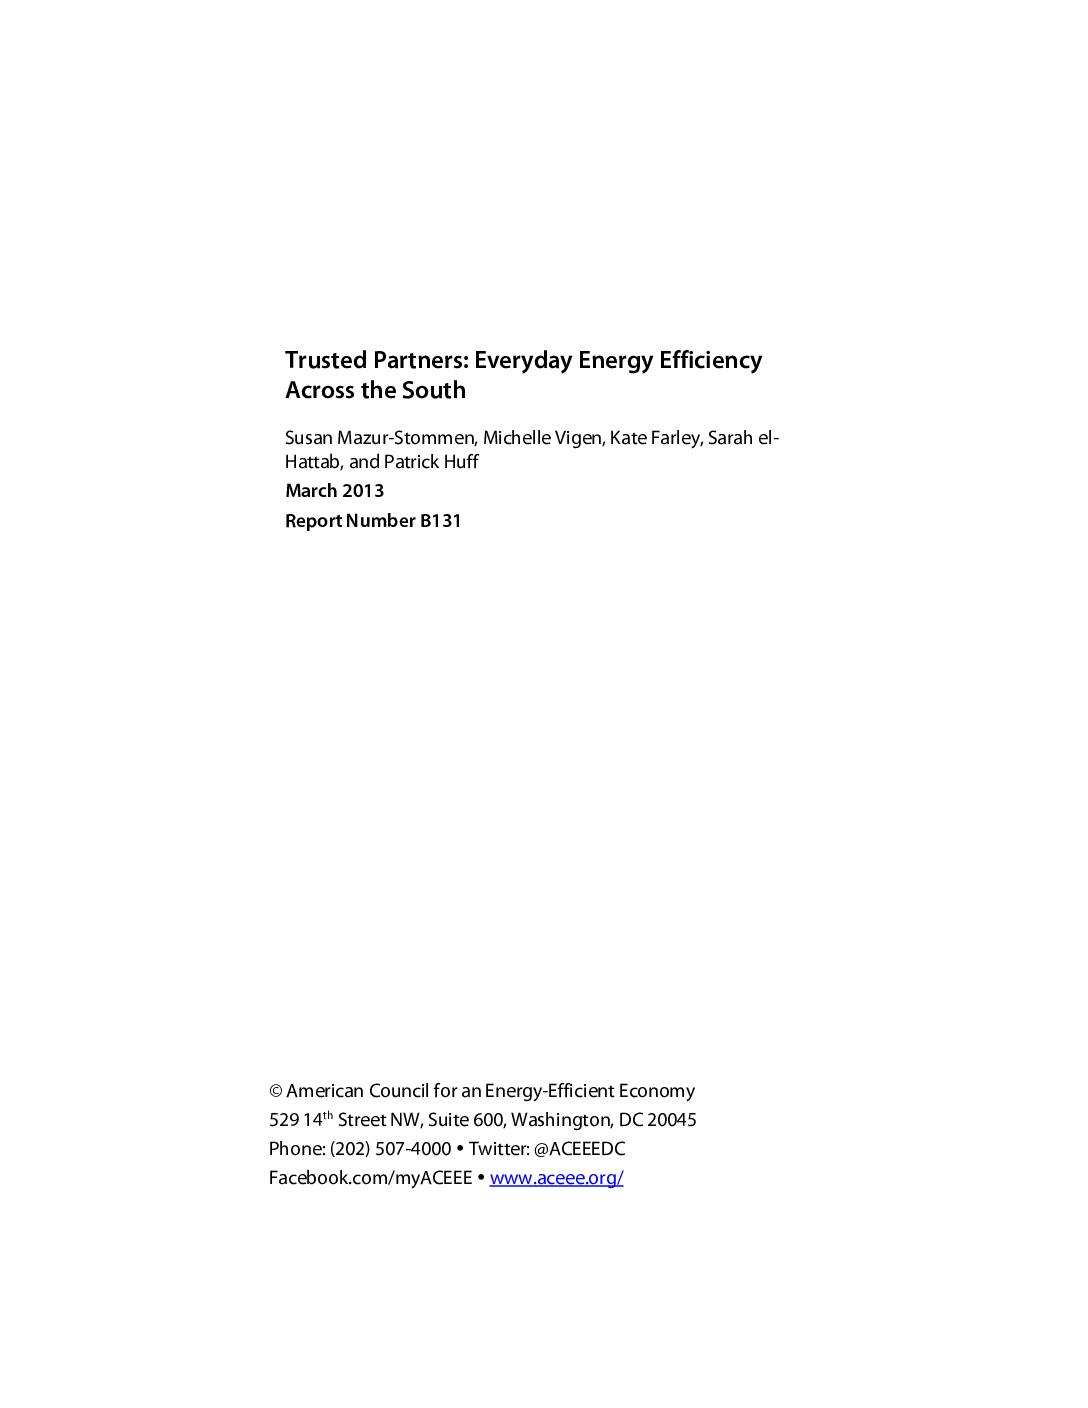 Trusted Partners: Everyday Energy Efficiency Across the South